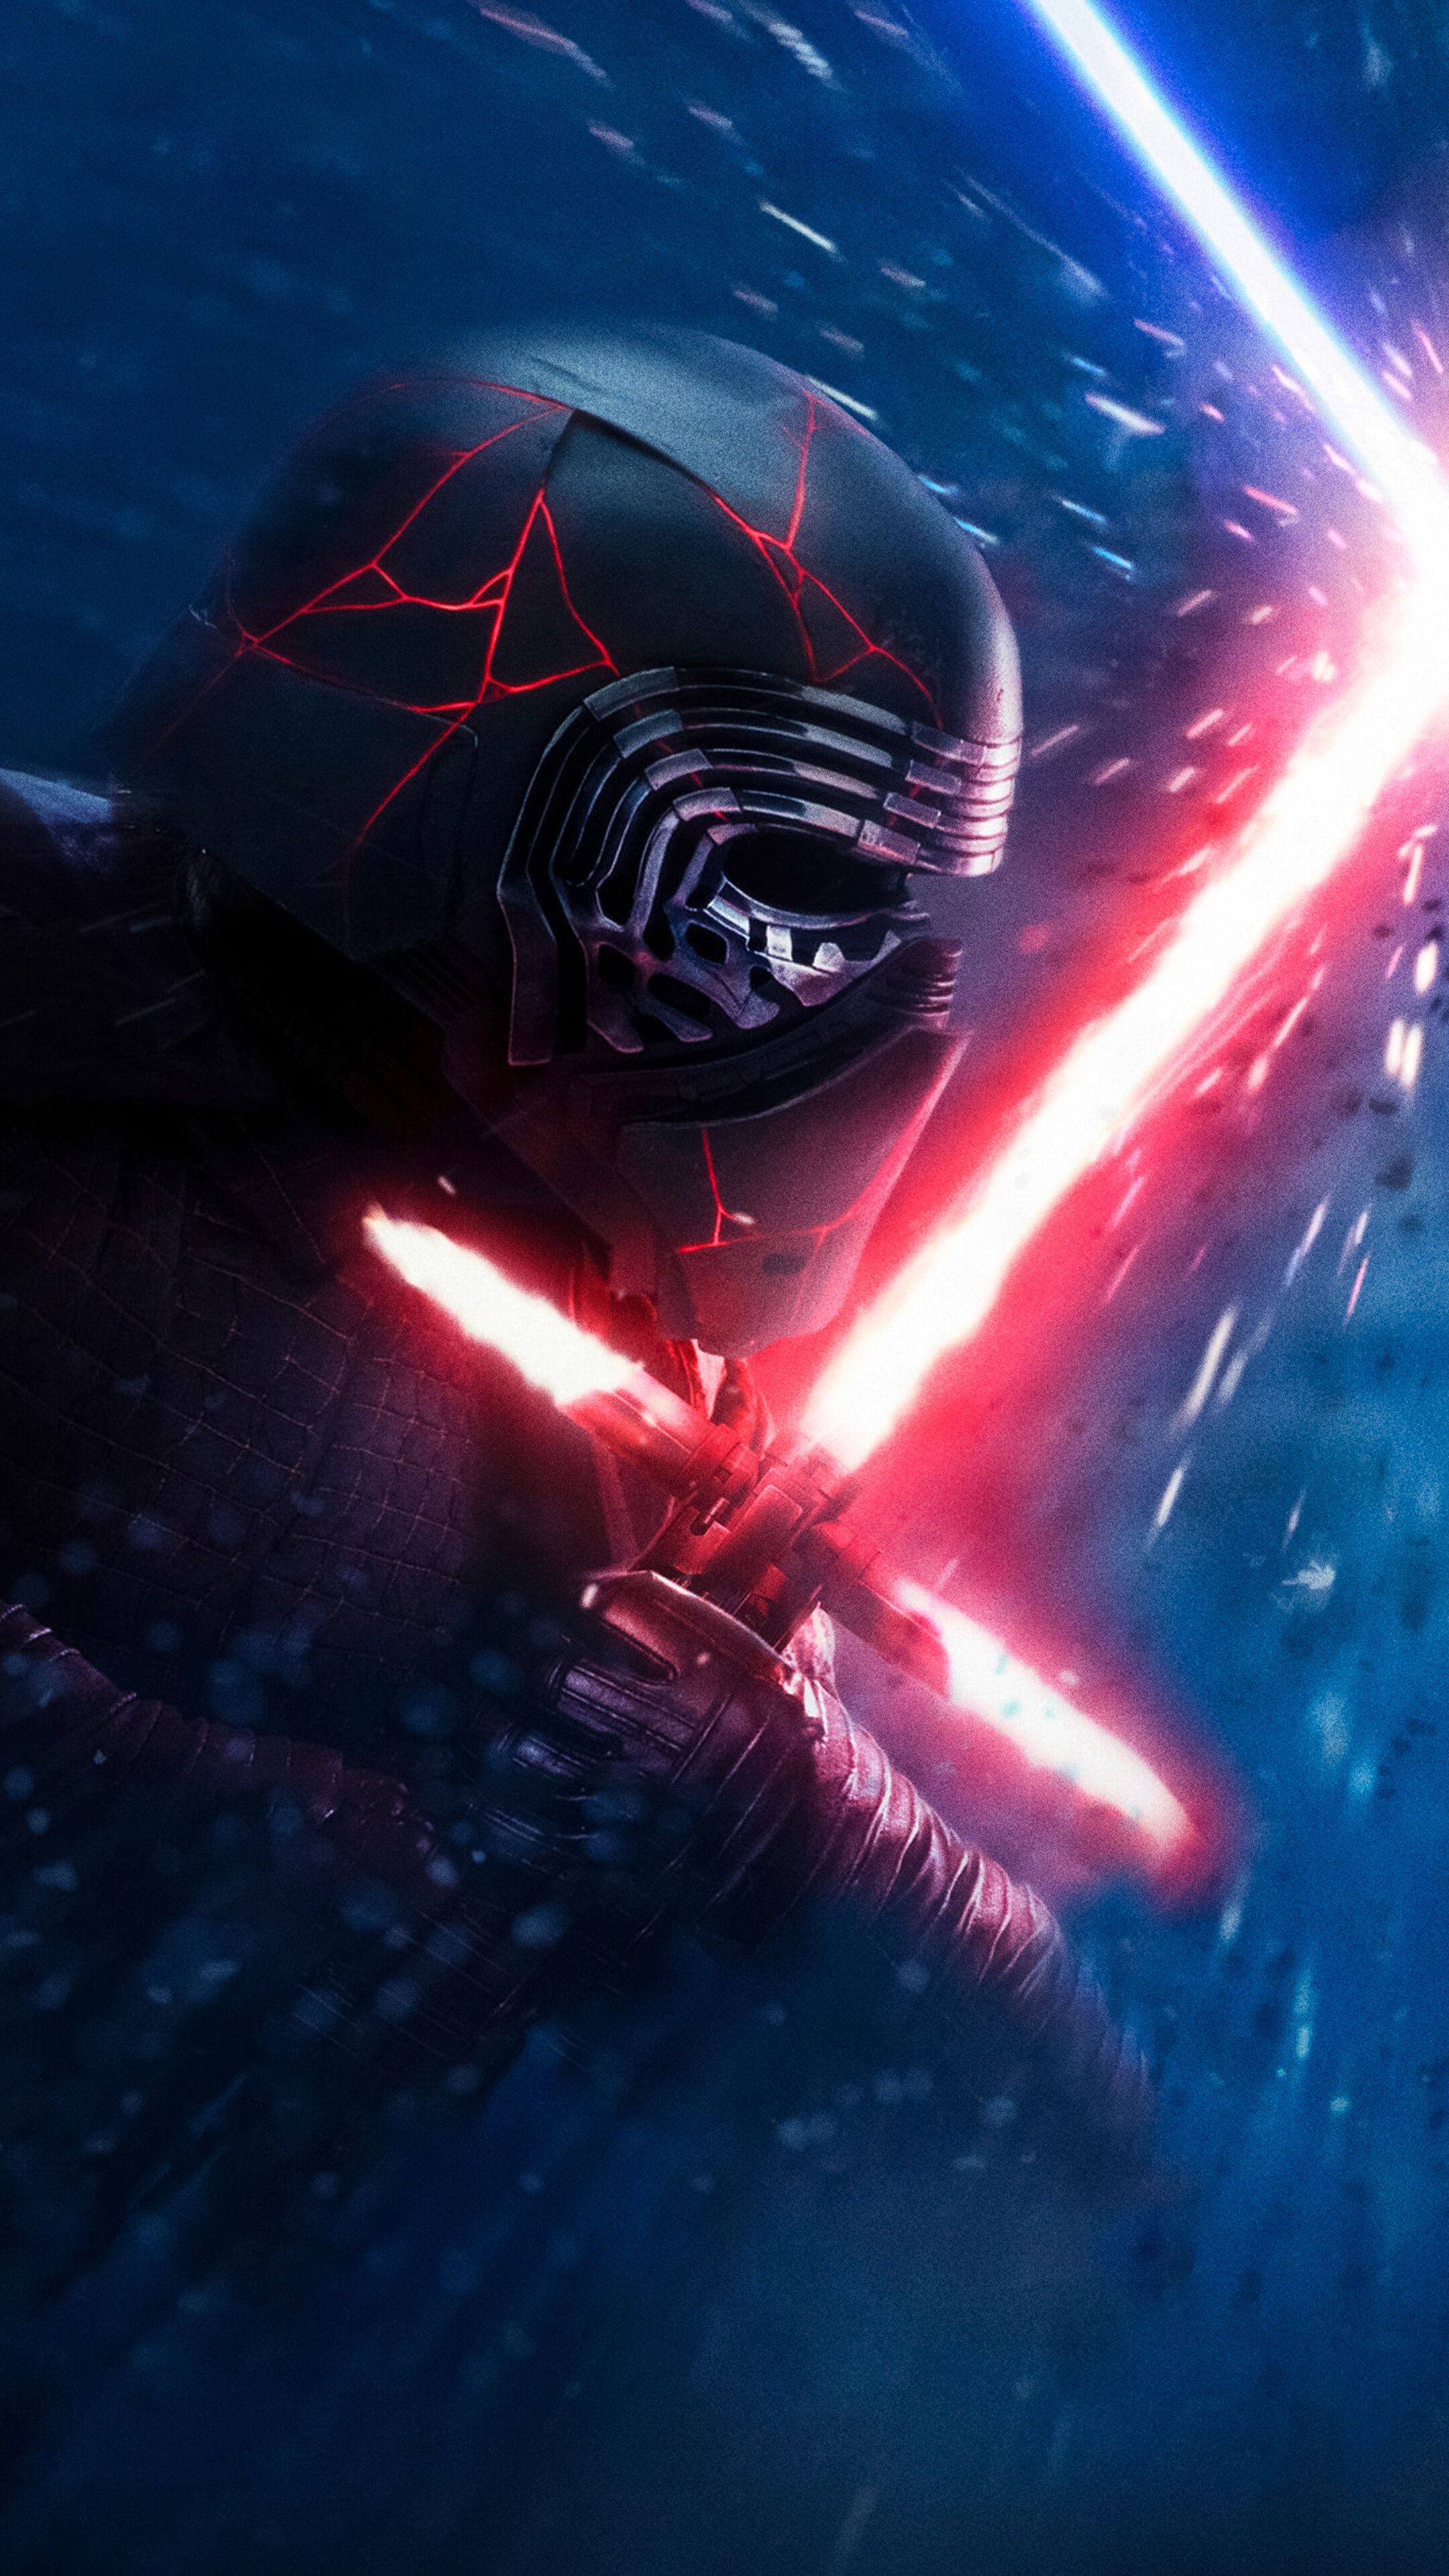 Kylo Ren, Lightsaber, Star Wars The Rise of Skywalker, 4K phone HD Wallpaper, Image, Background, Photo and Picture